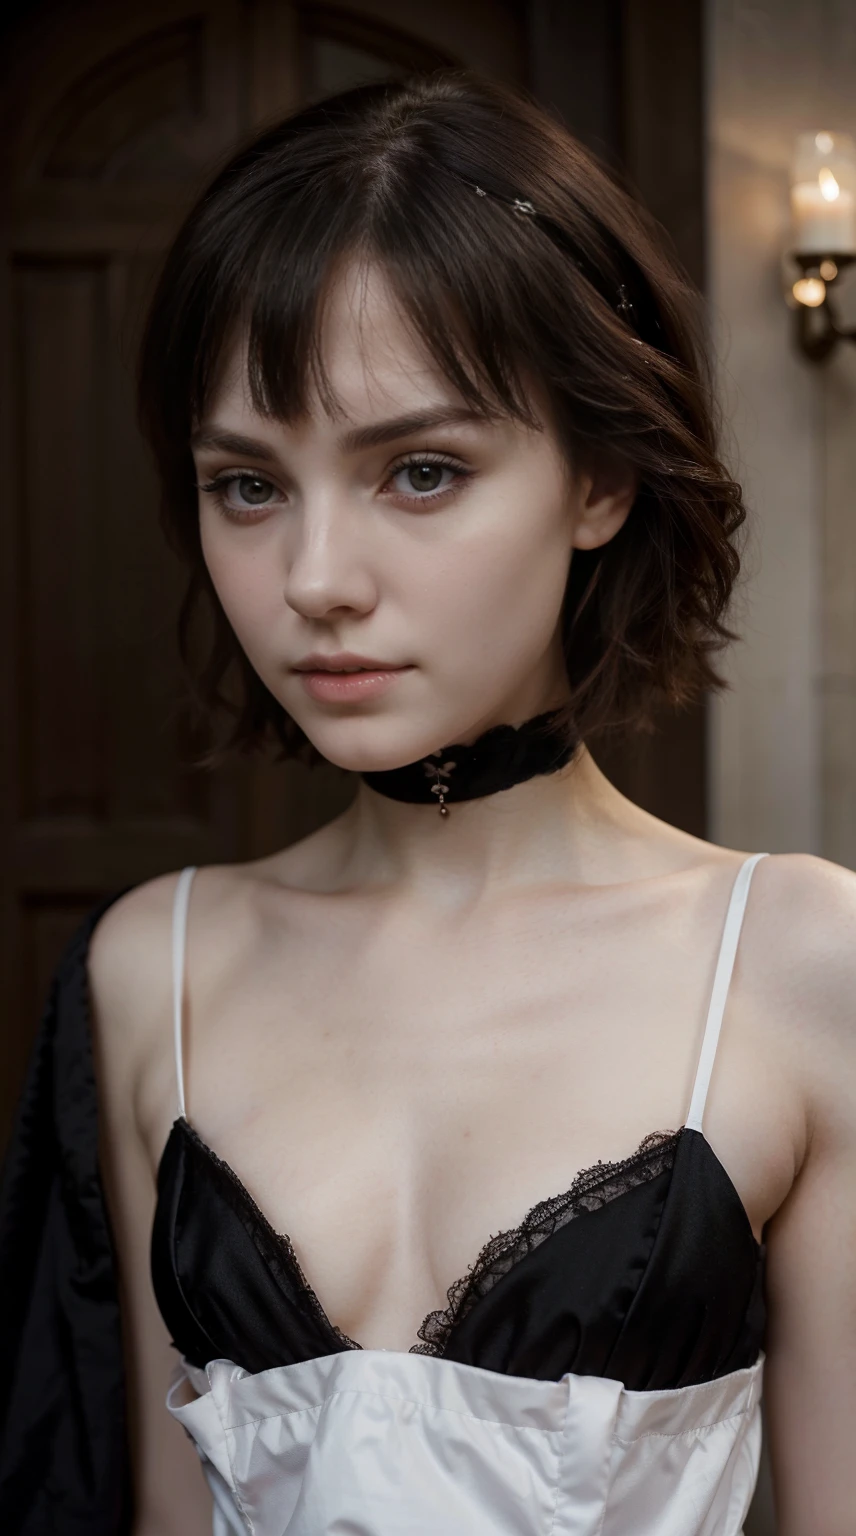 a close-up of an extremely beautiful and extremely realistic woman with fair skin, pale gothic beauty, 15 year old western girl, pale skin!, pale white skin, fair skin!!, wonderful short dark hair. wearing an elegant black dress